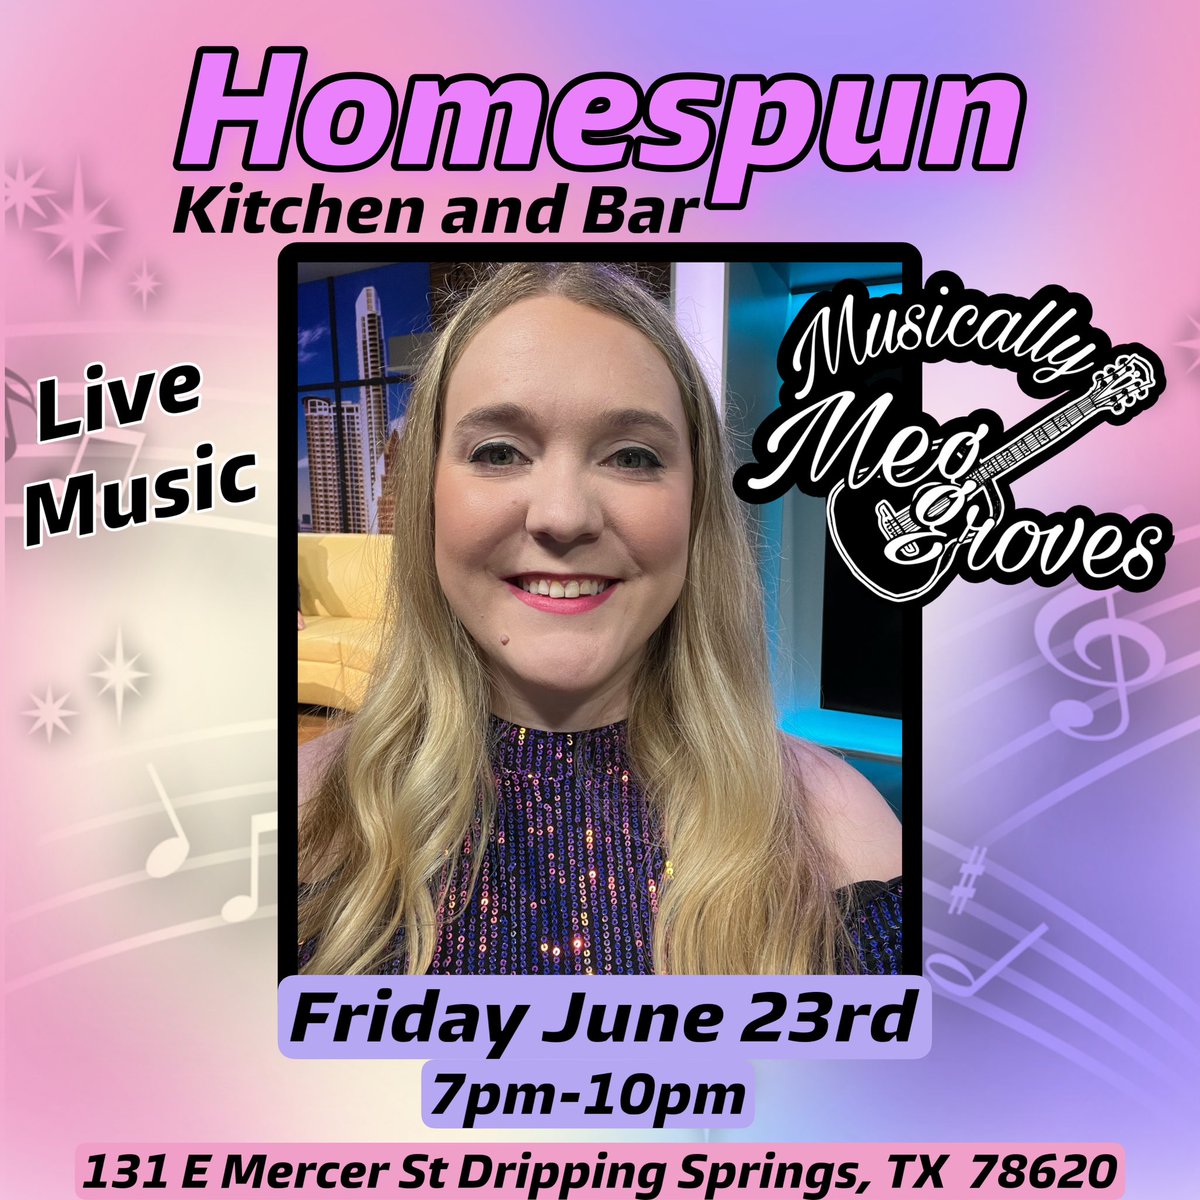 I’m back at Homespun! 
Today Friday June 23rd from 7pm-10pm 

131 E Mercer St
Dripping Springs, TX  78620

#livemusic #musician #musicians #music #liveperformance #austintexas #austin #austinmusicscene #austinmusic #austintx #drippingspringstx #drippingsprings